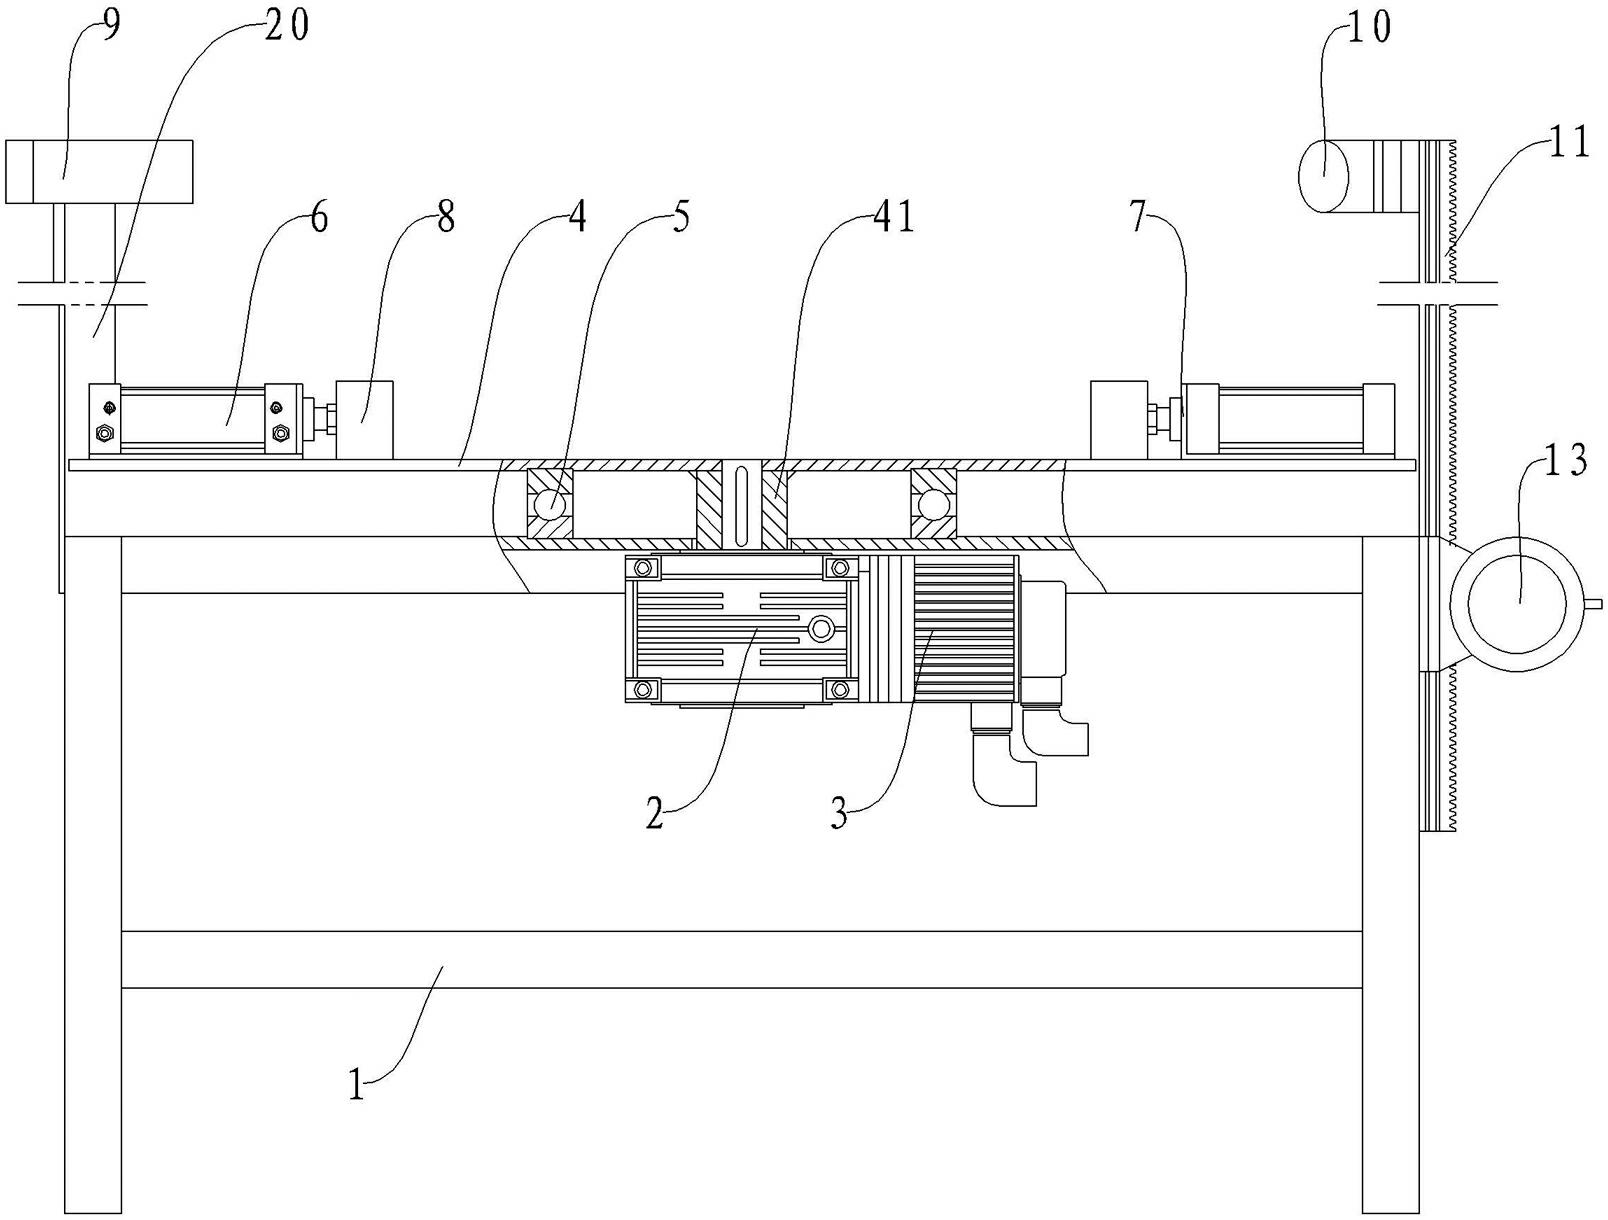 Visual worktable for workpiece conveying on catenary